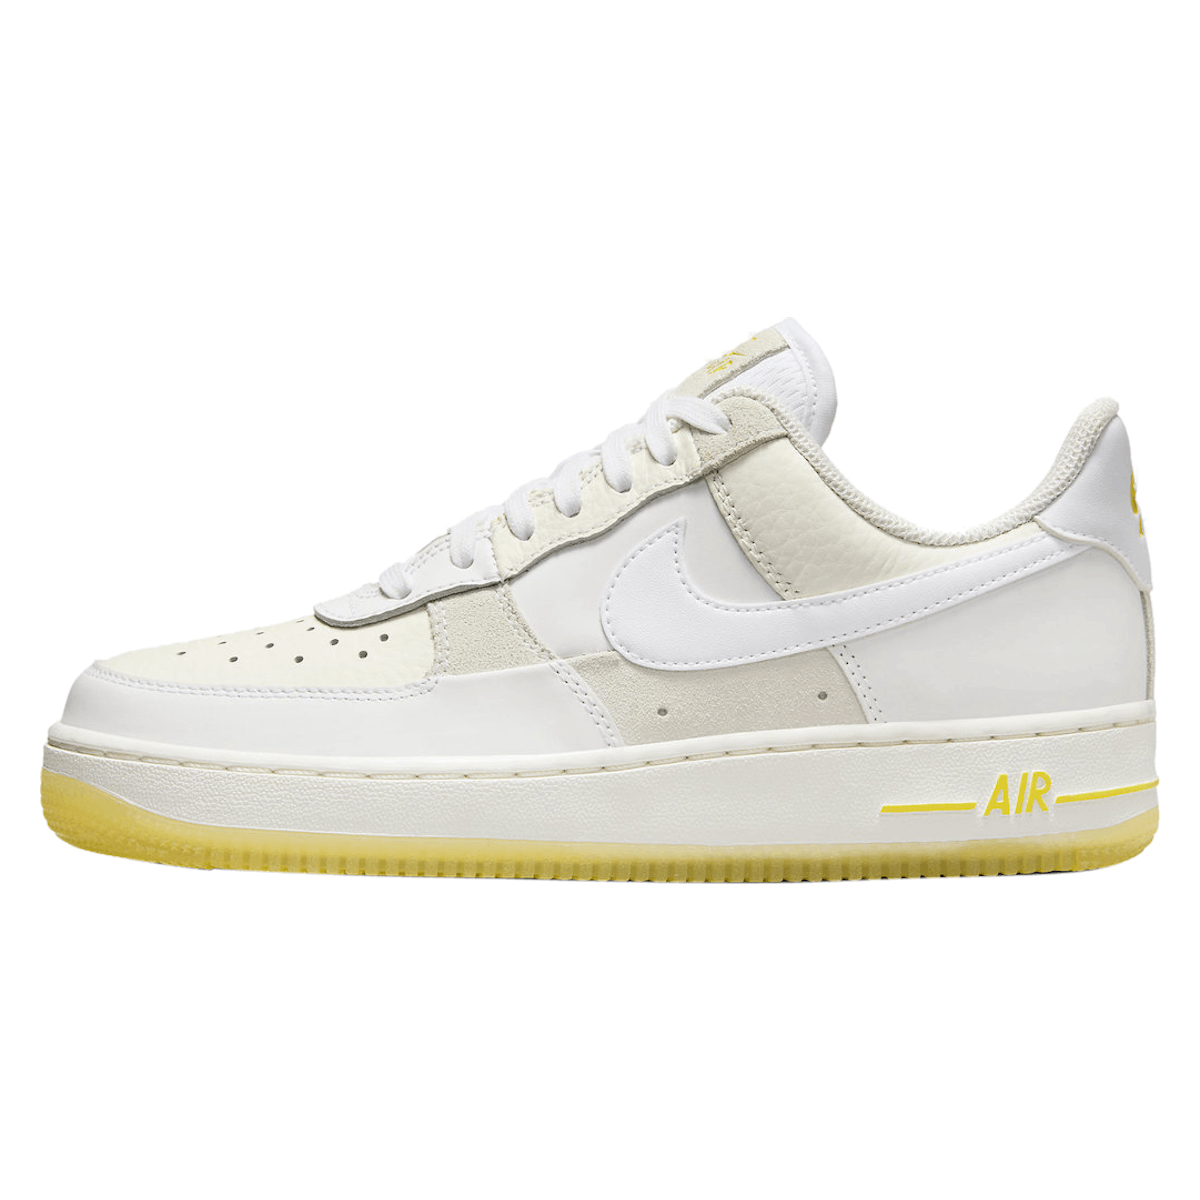 Nike Air Force 1 '07 Low "White Yellow"